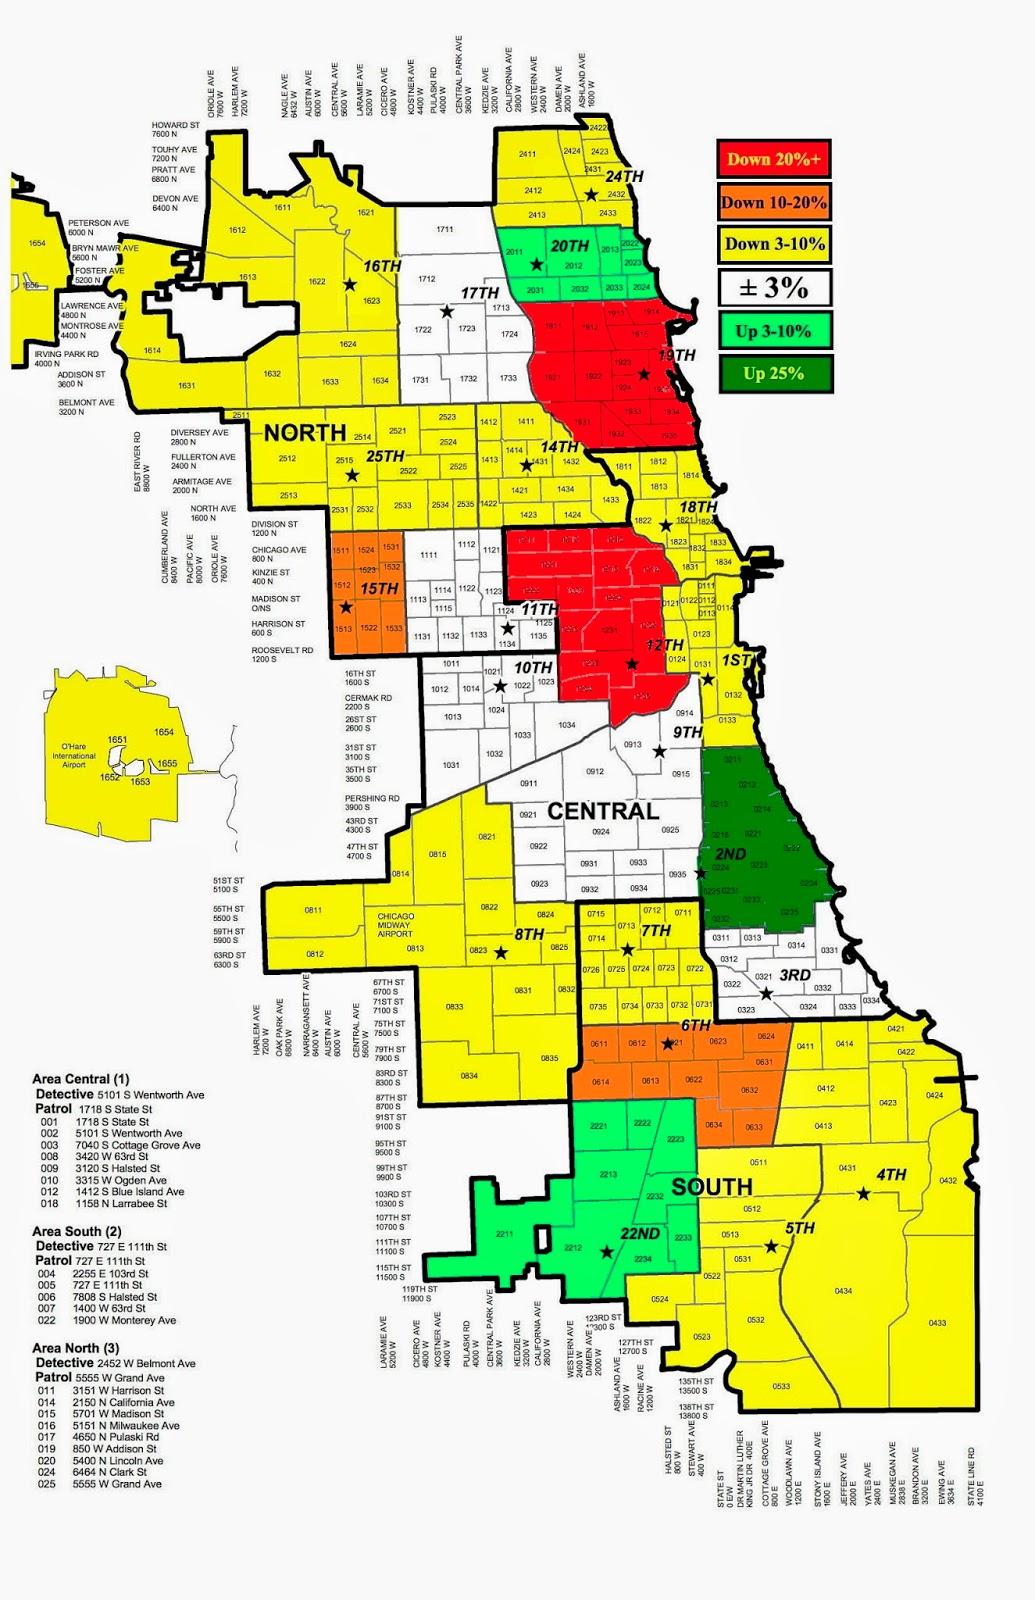 Chicago crime map - Chicago police crime map (United States of America)